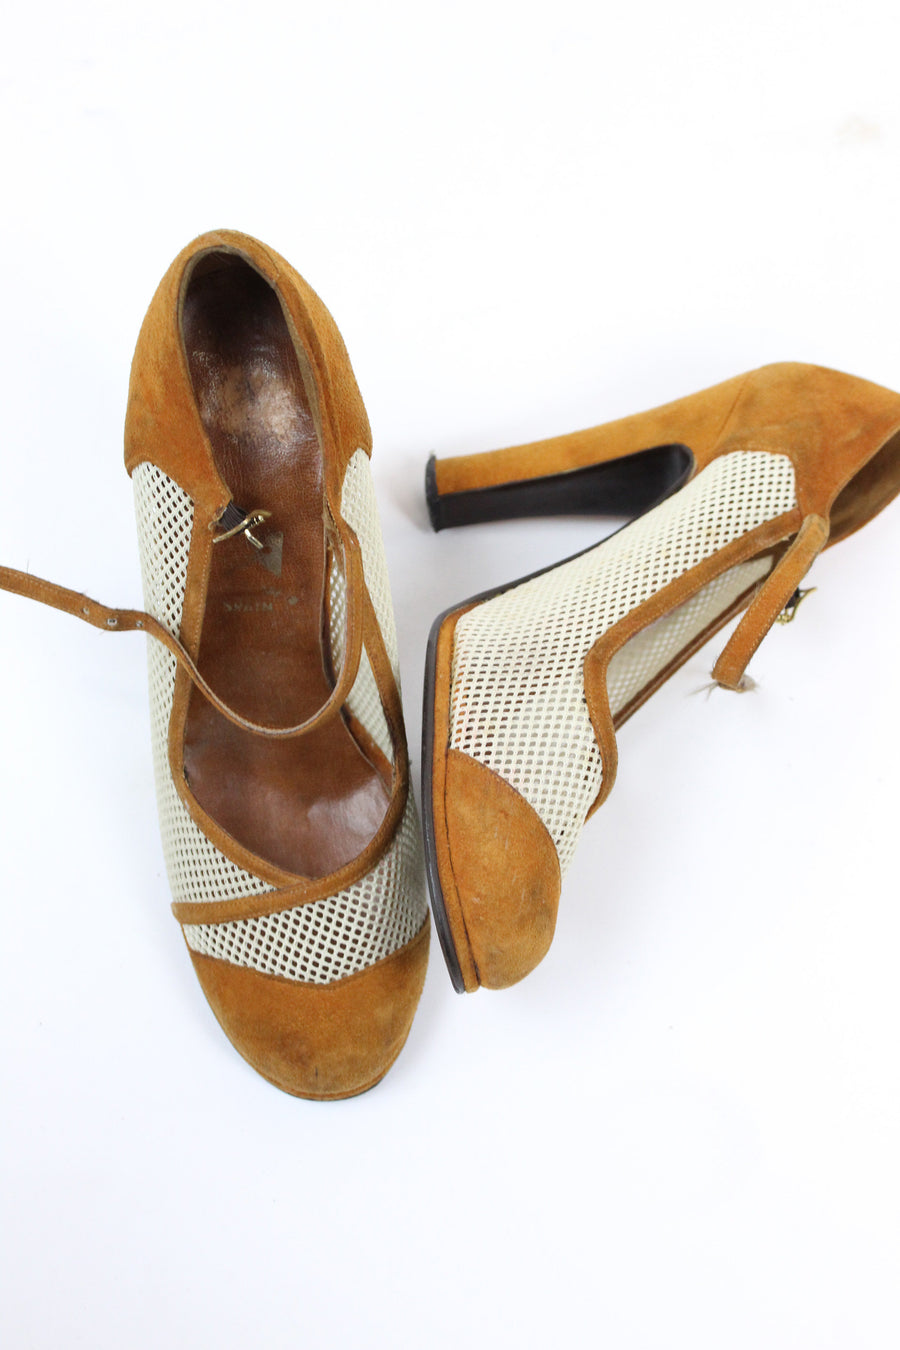 1960's spectator pumps | suede and mesh mary jane | size 6.5